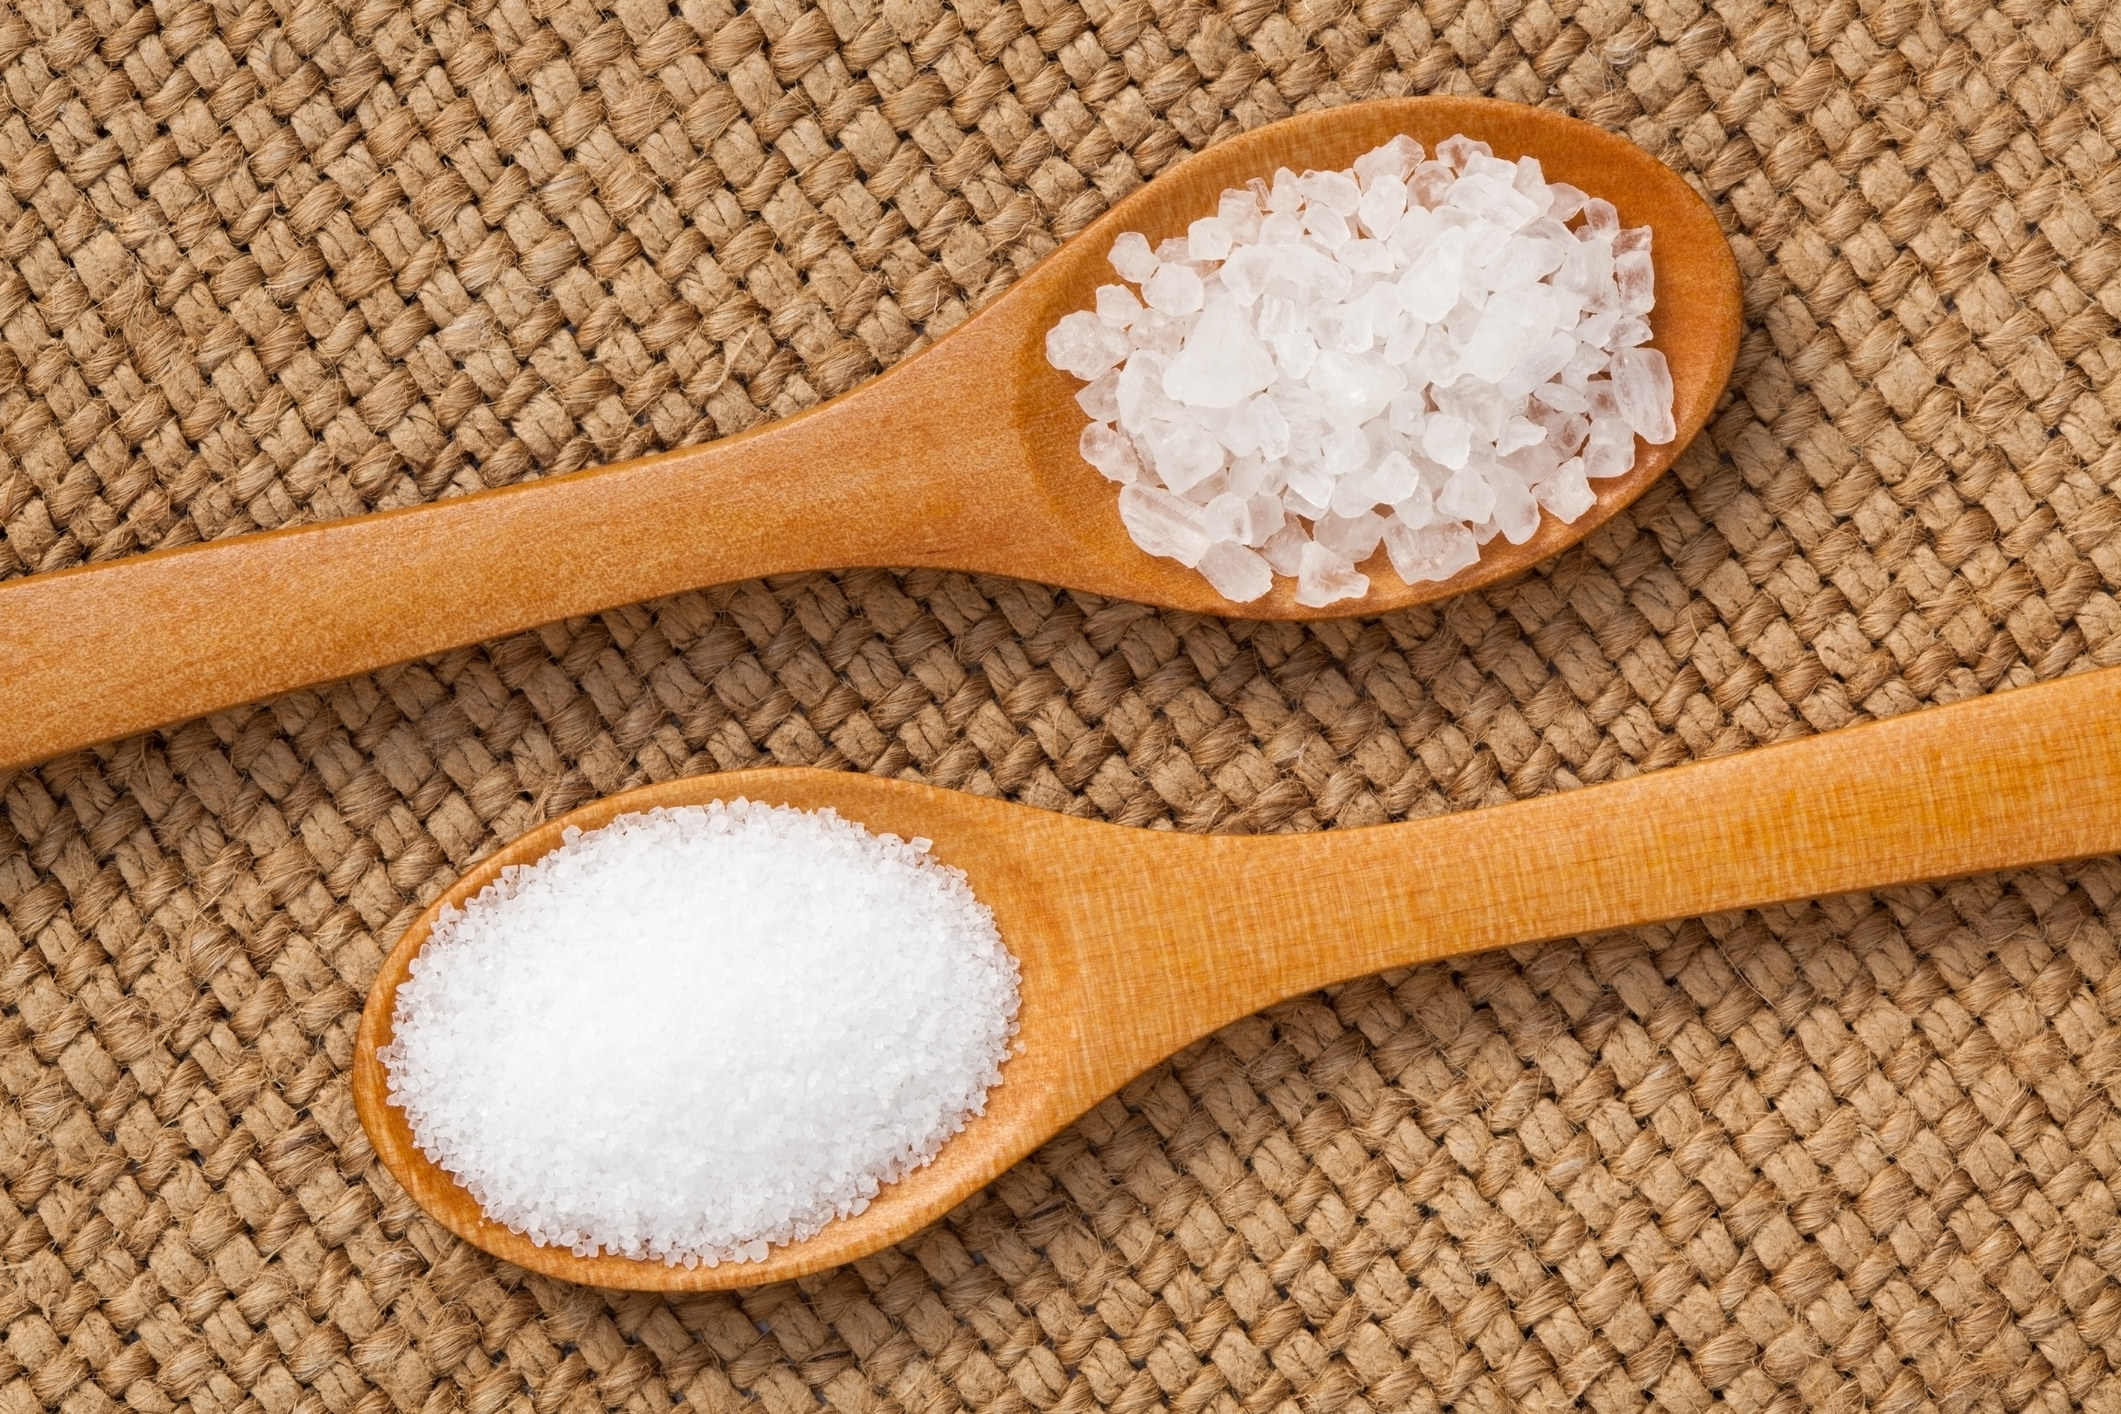 Coarse salt on a wooden spoon and finer salt on a wooden spoon